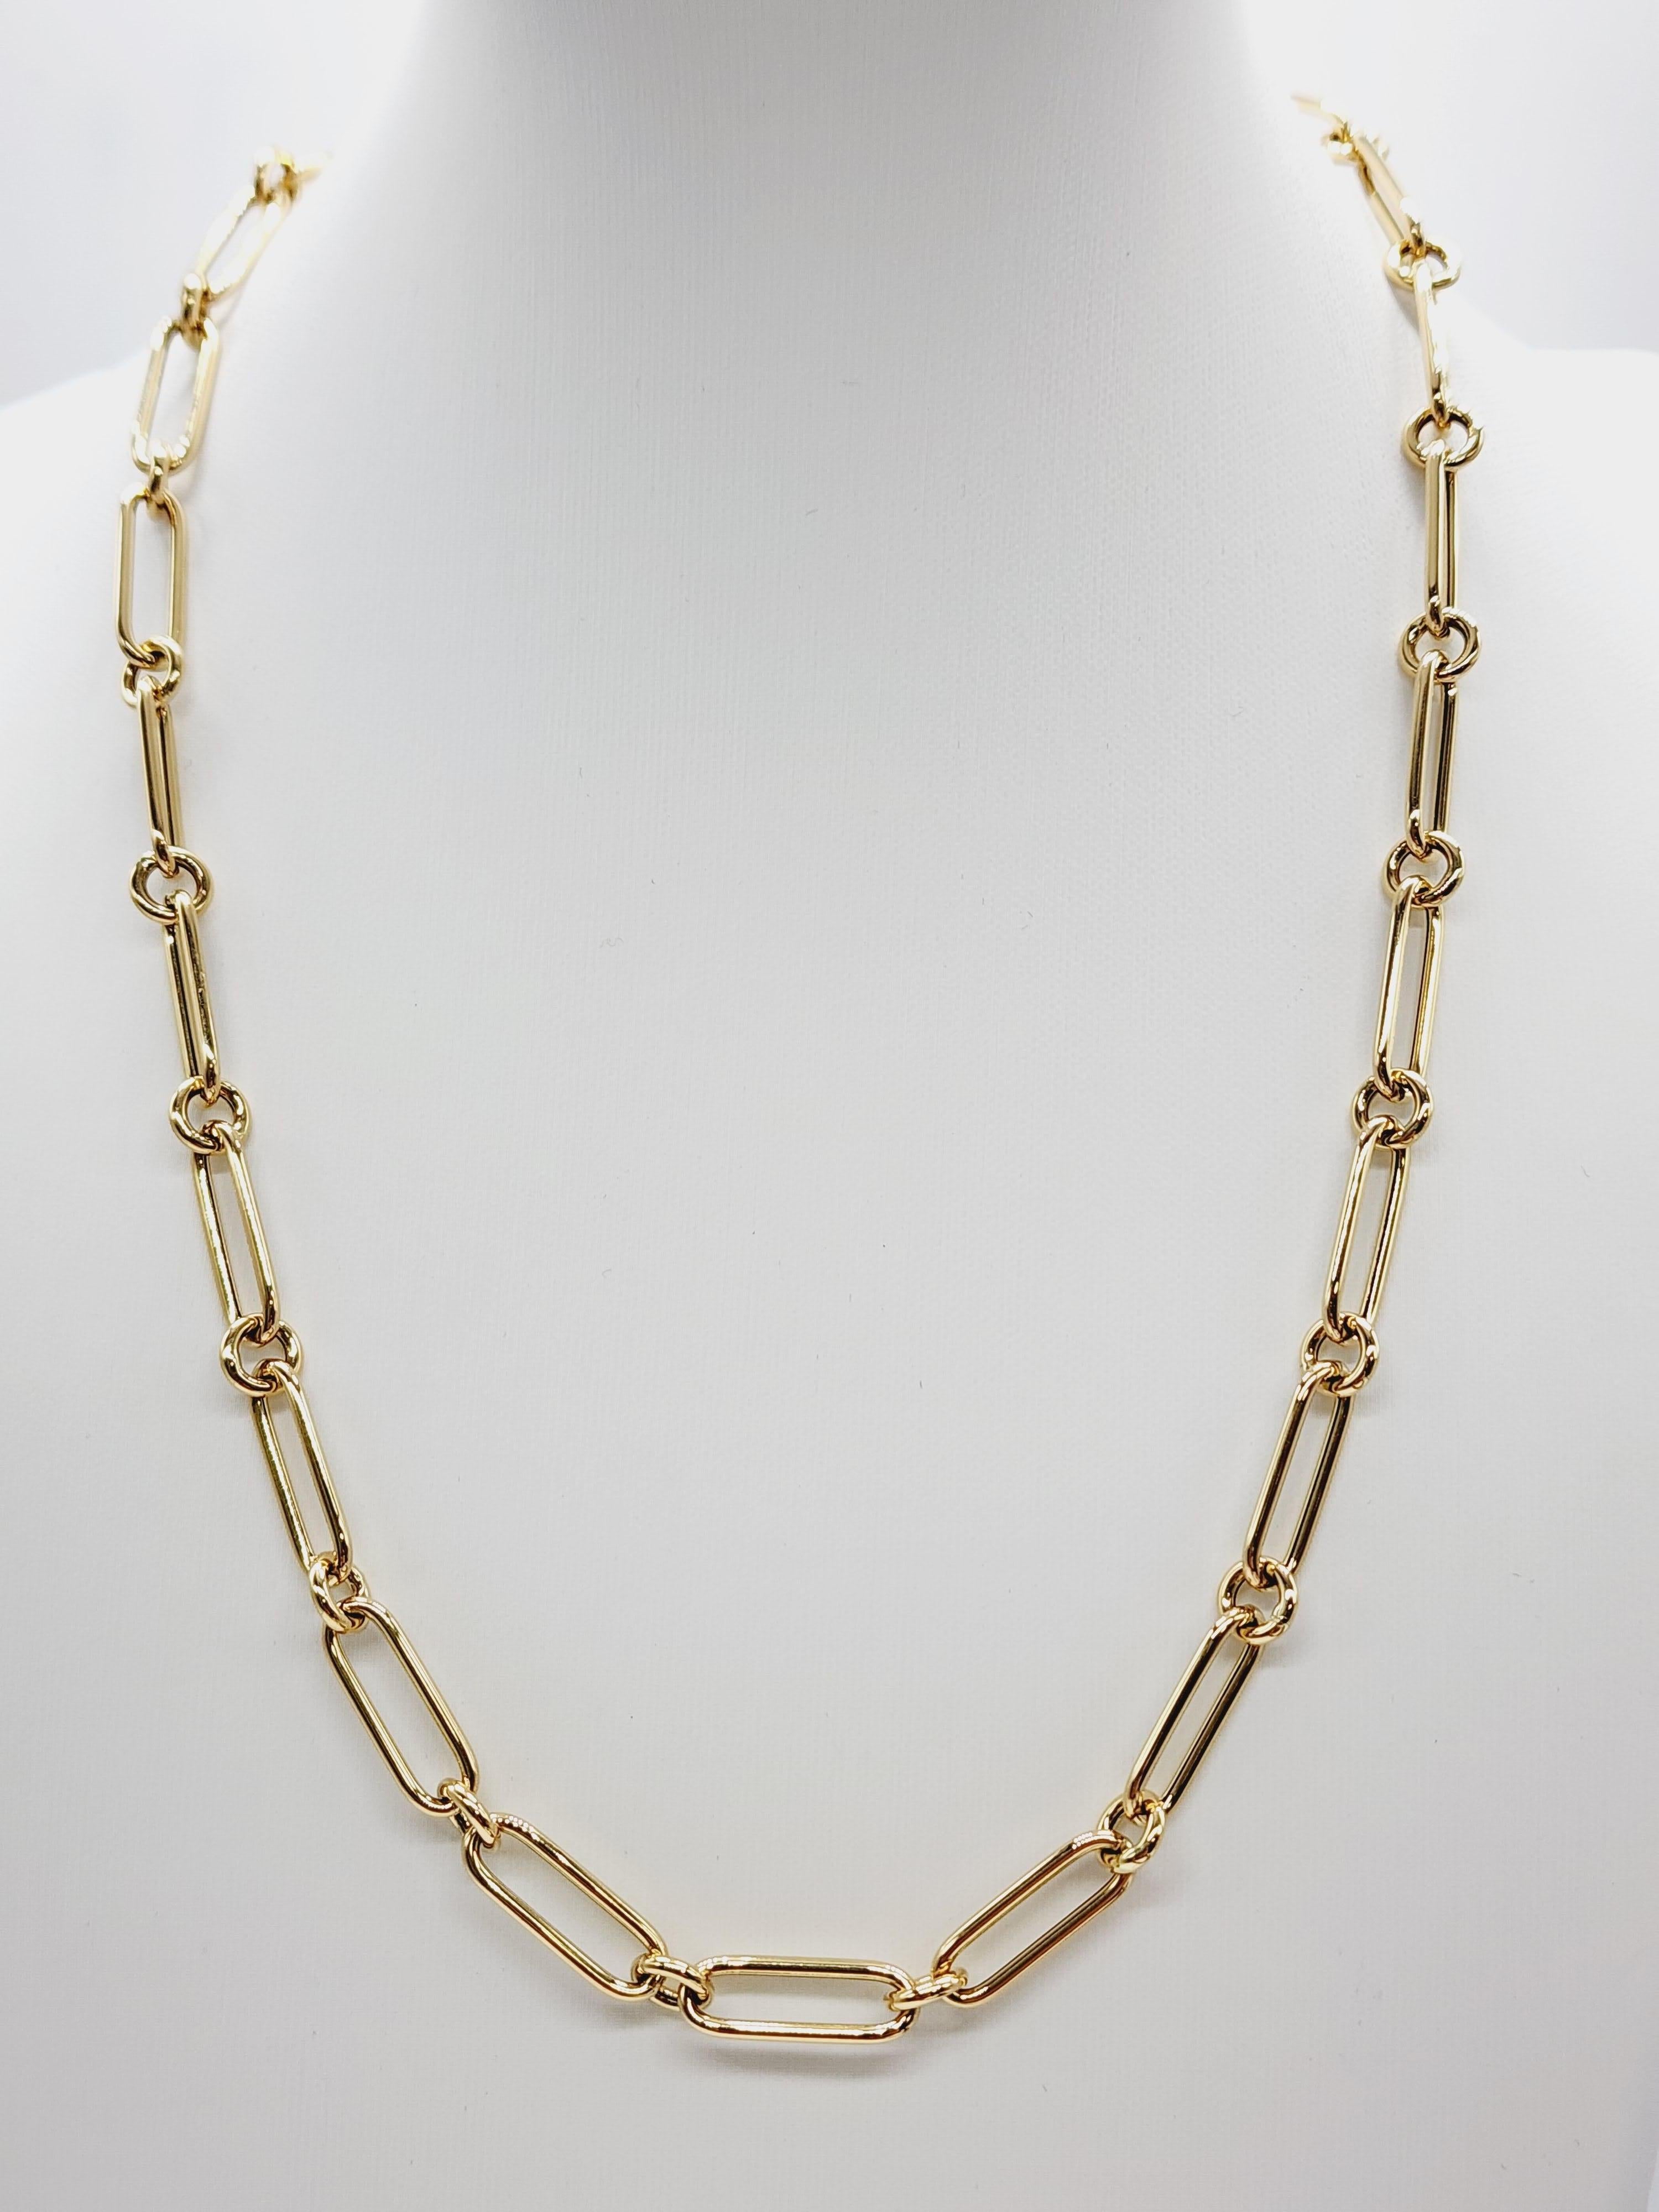 Italian made designer 18k gold link chain necklace in yellow gold. A modern, edgy, and timeless necklace chain.

Links: Approx. 5.5 mm wide
Weight: 18'' length is approx. 13 grams
Hollow Yellow Chain 18K Yellow Gold. 
Light weight easy to wear.